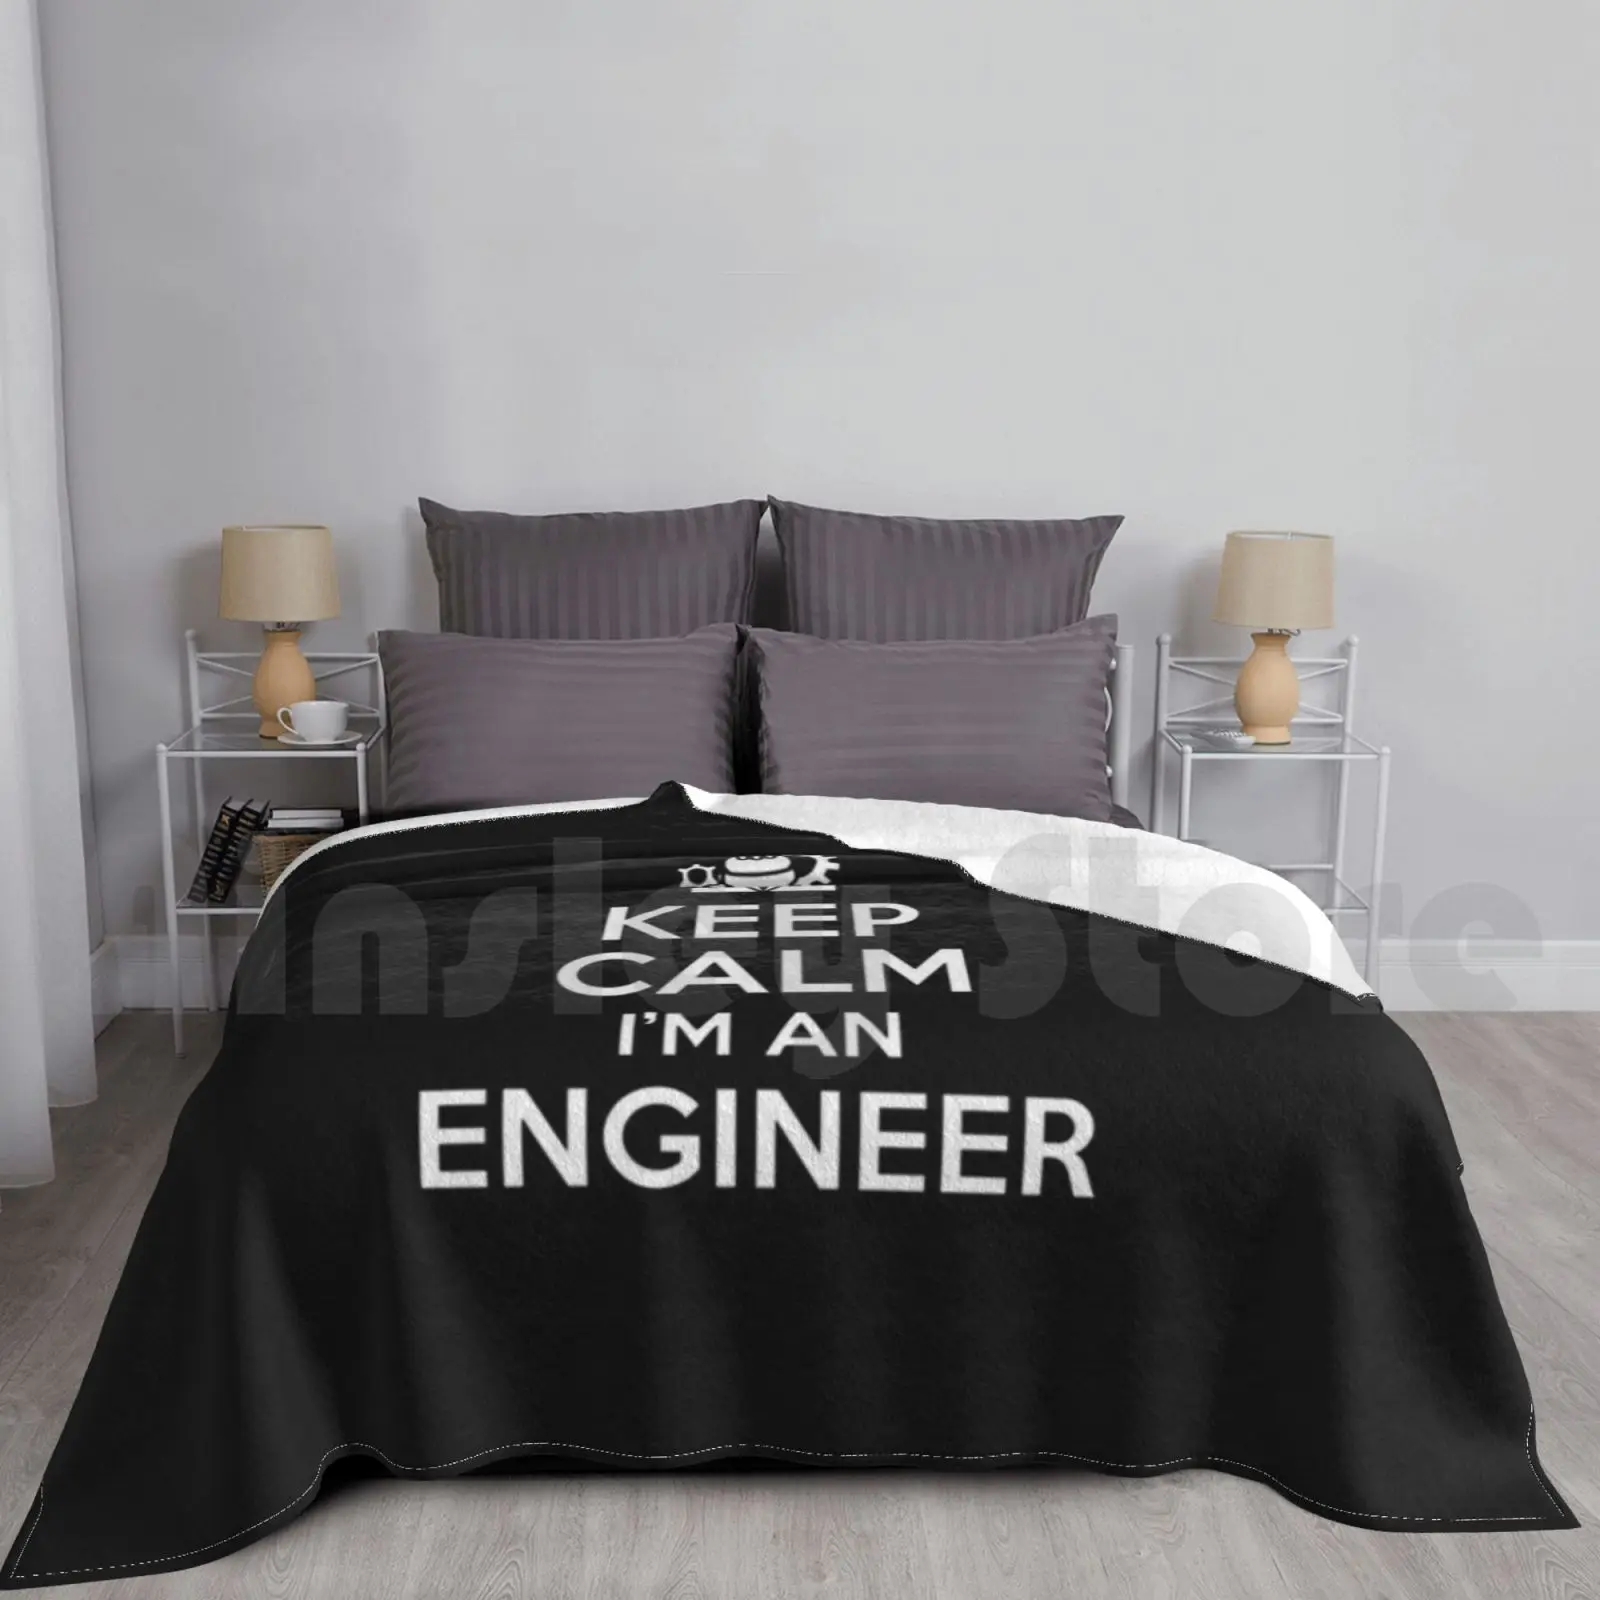 

Keep Calm I'm An Engineer Blanket For Sofa Bed Travel Keep Calm Im An Engineer Engineer Engineer Gift Engineer